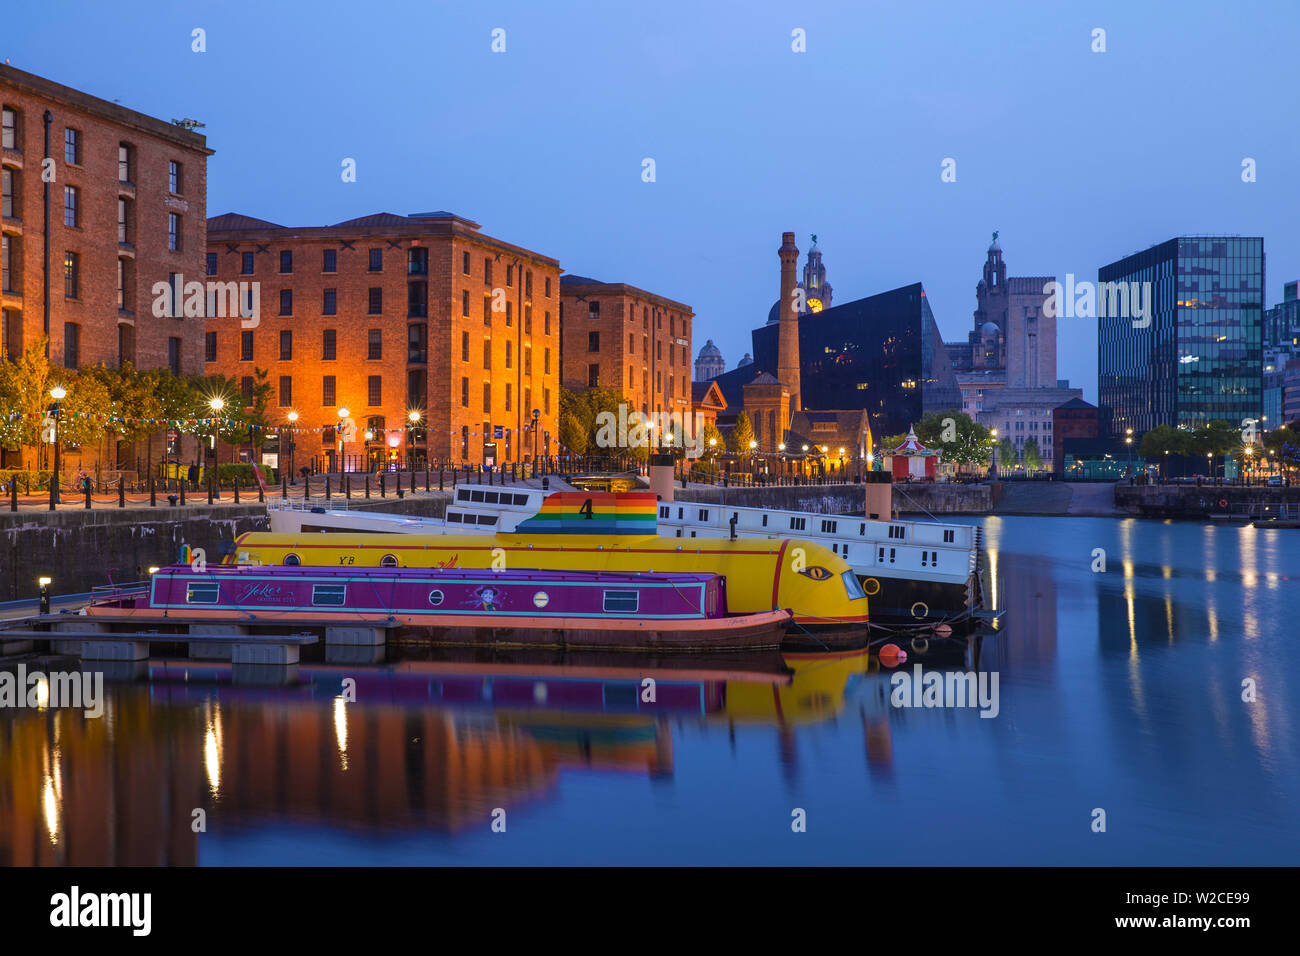 United Kingdom, England, Merseyside, Liverpool, Salthouse Dock, View of docks looking towards the Pump House and Pier Head buildings Stock Photo